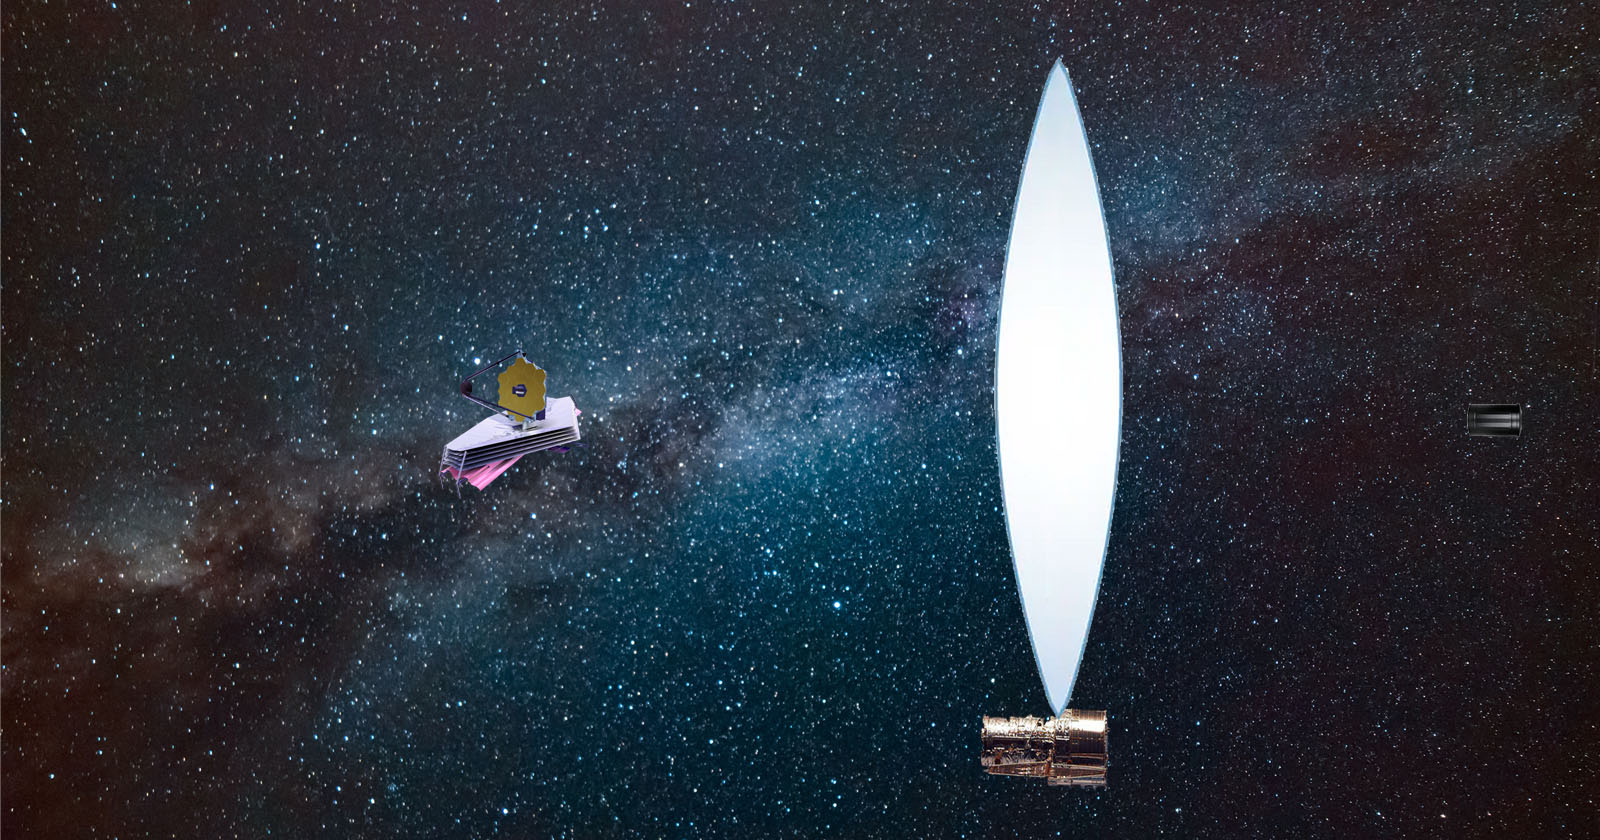 An illustration showing the James Webb Space Telescope compared to a future space telescope a hundred times larger. Image Credit: Studio Ella Maru.